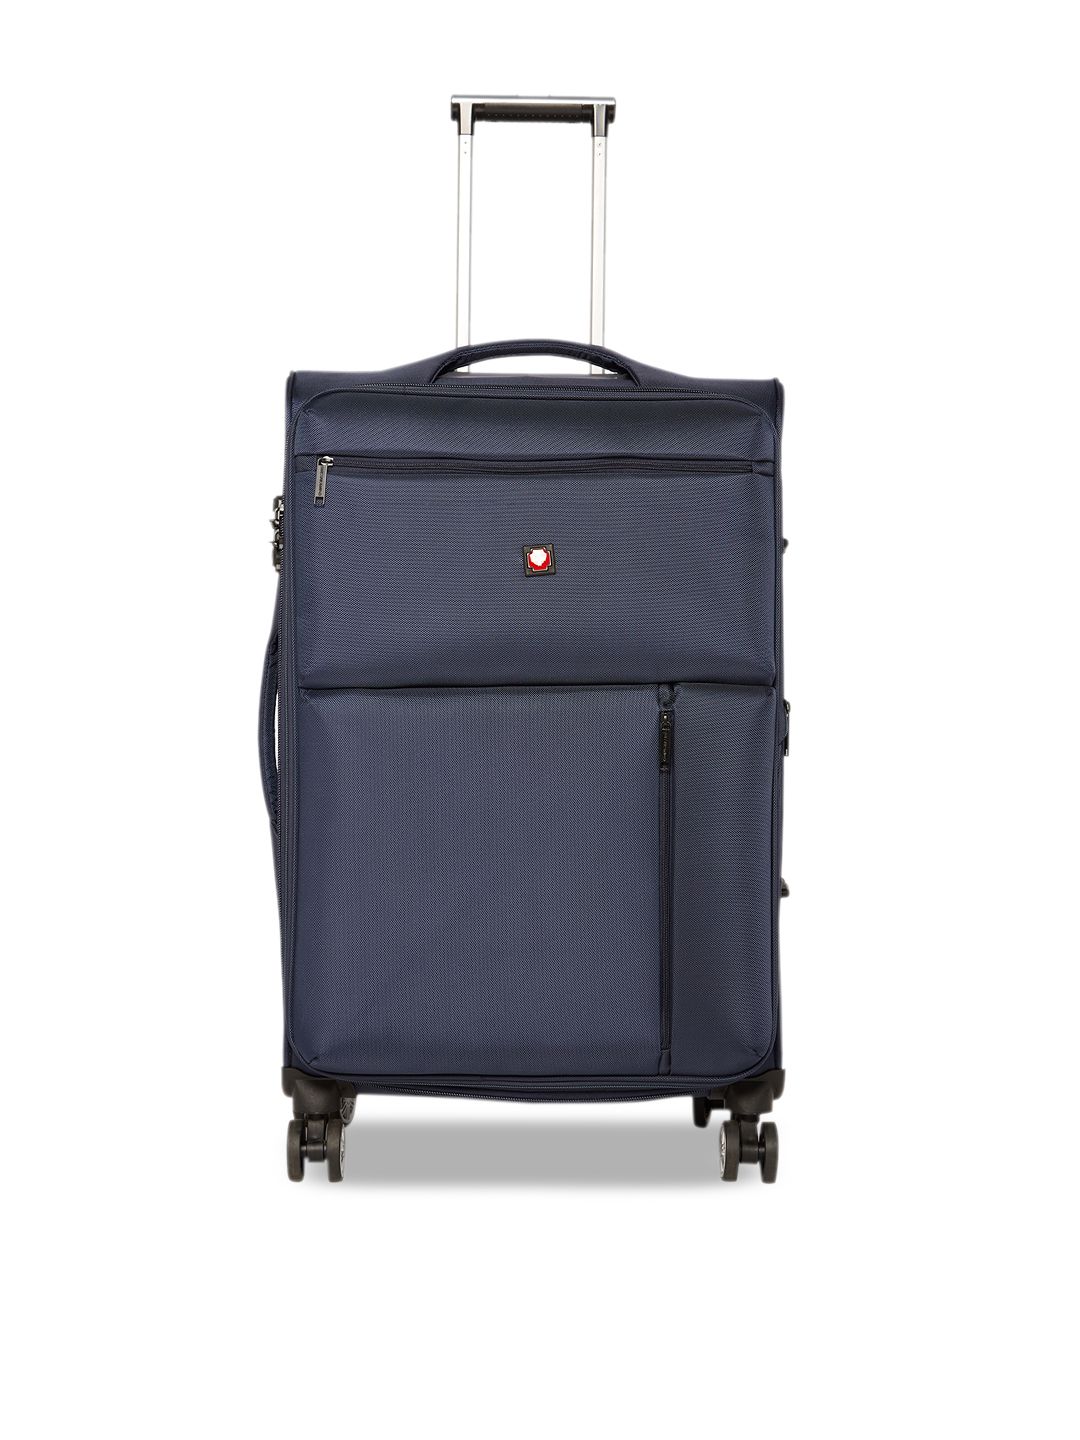 SWISS BRAND Unisex Blue Solid Locarno 360-Degree Rotation Soft-Sided Large Trolley Suitcase Price in India